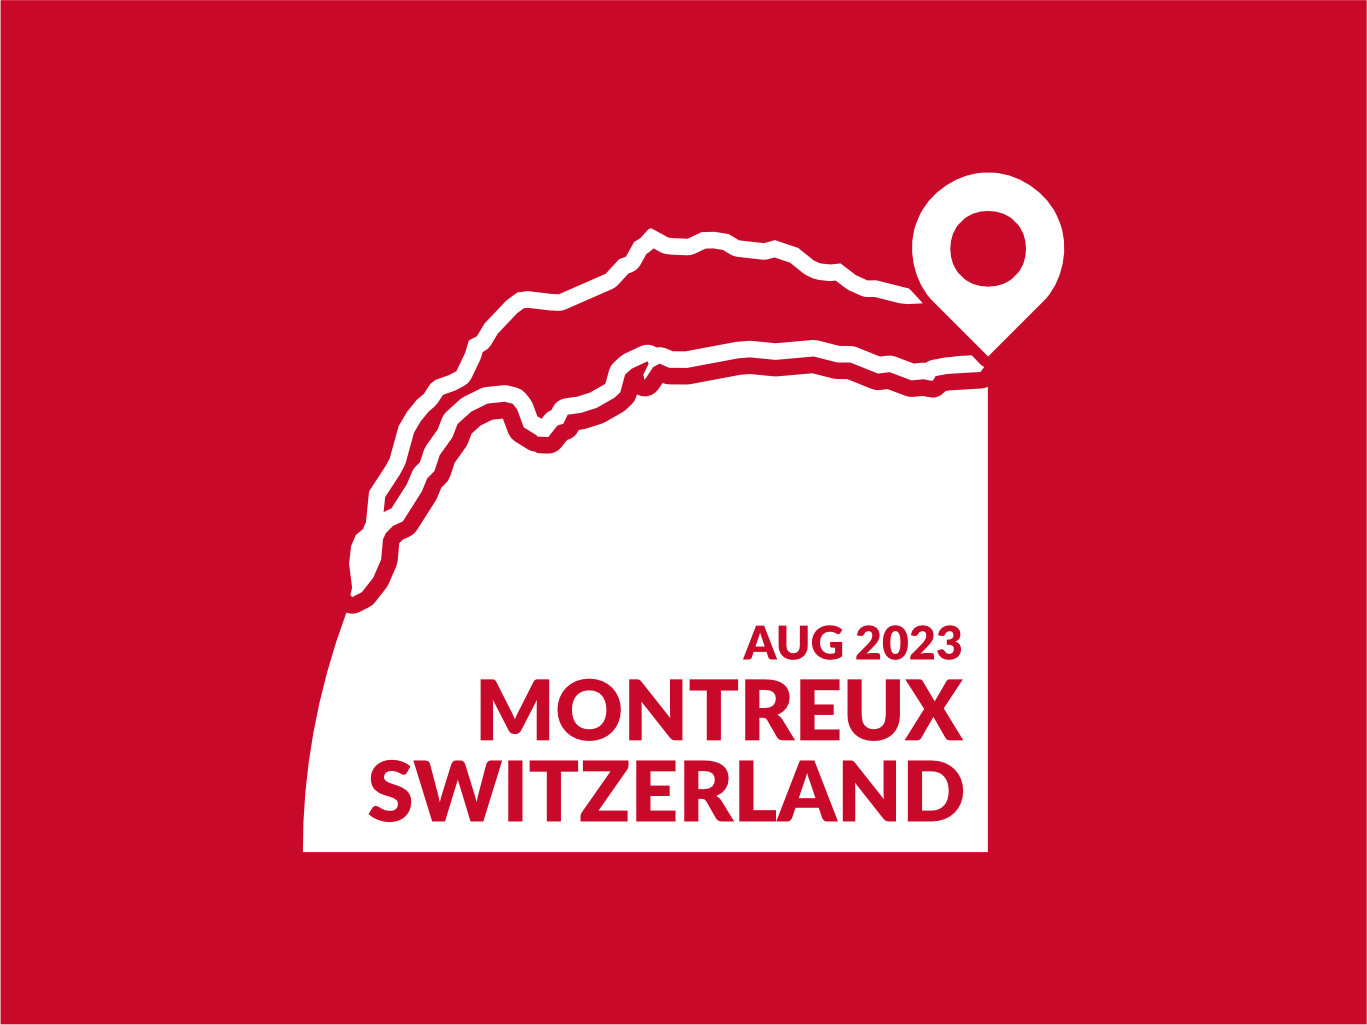 Passport style stamp for Montreux